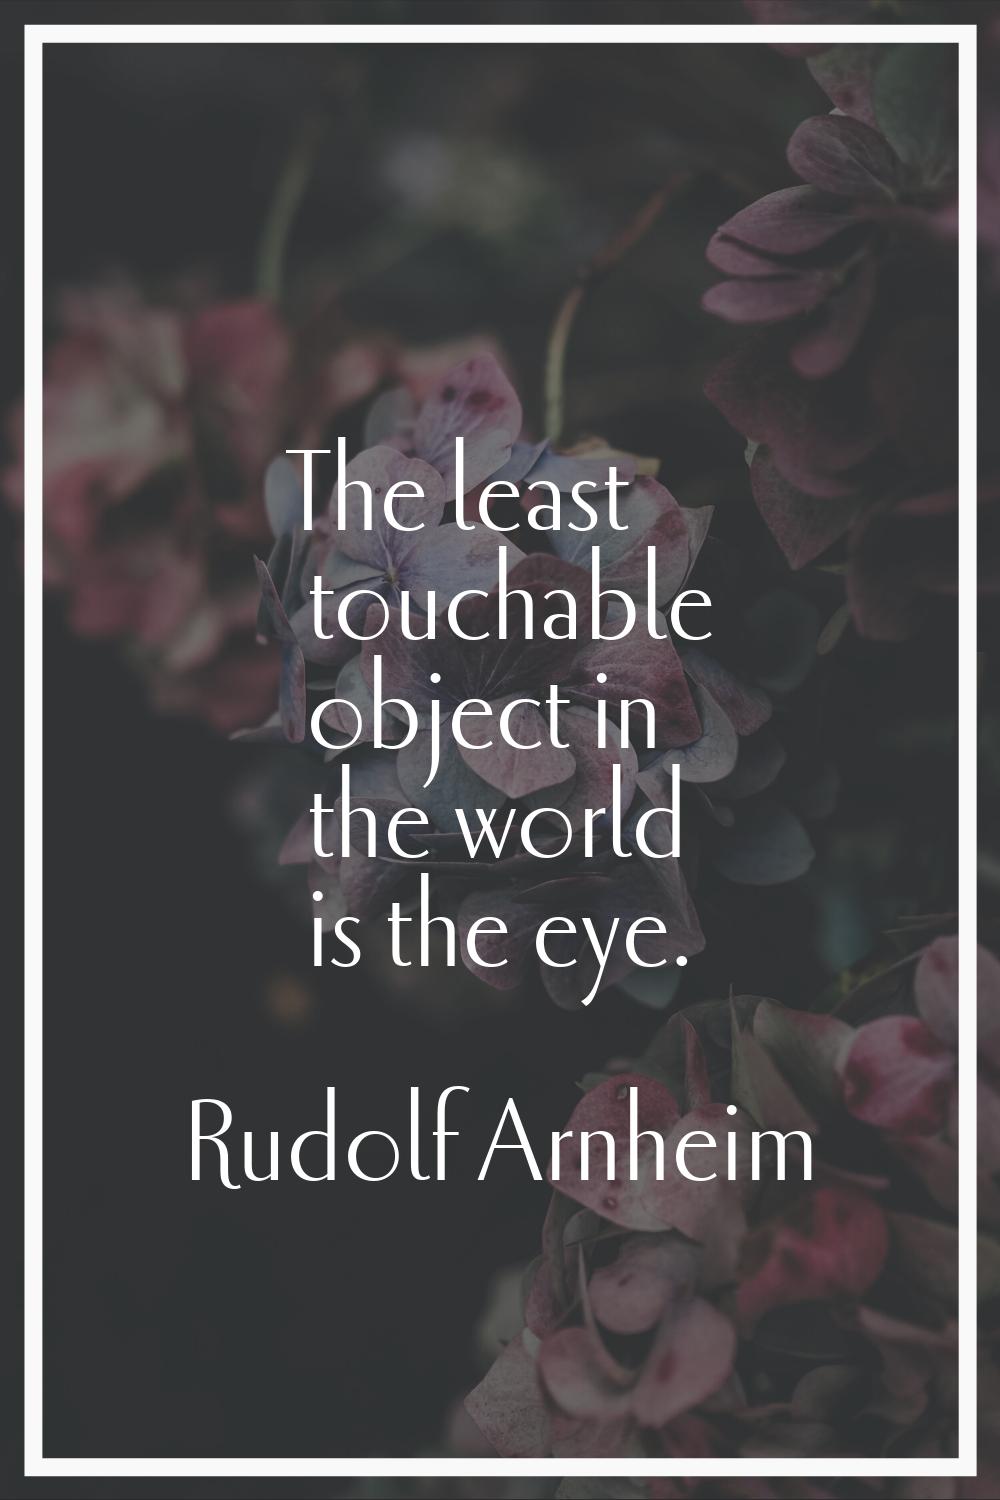 The least touchable object in the world is the eye.